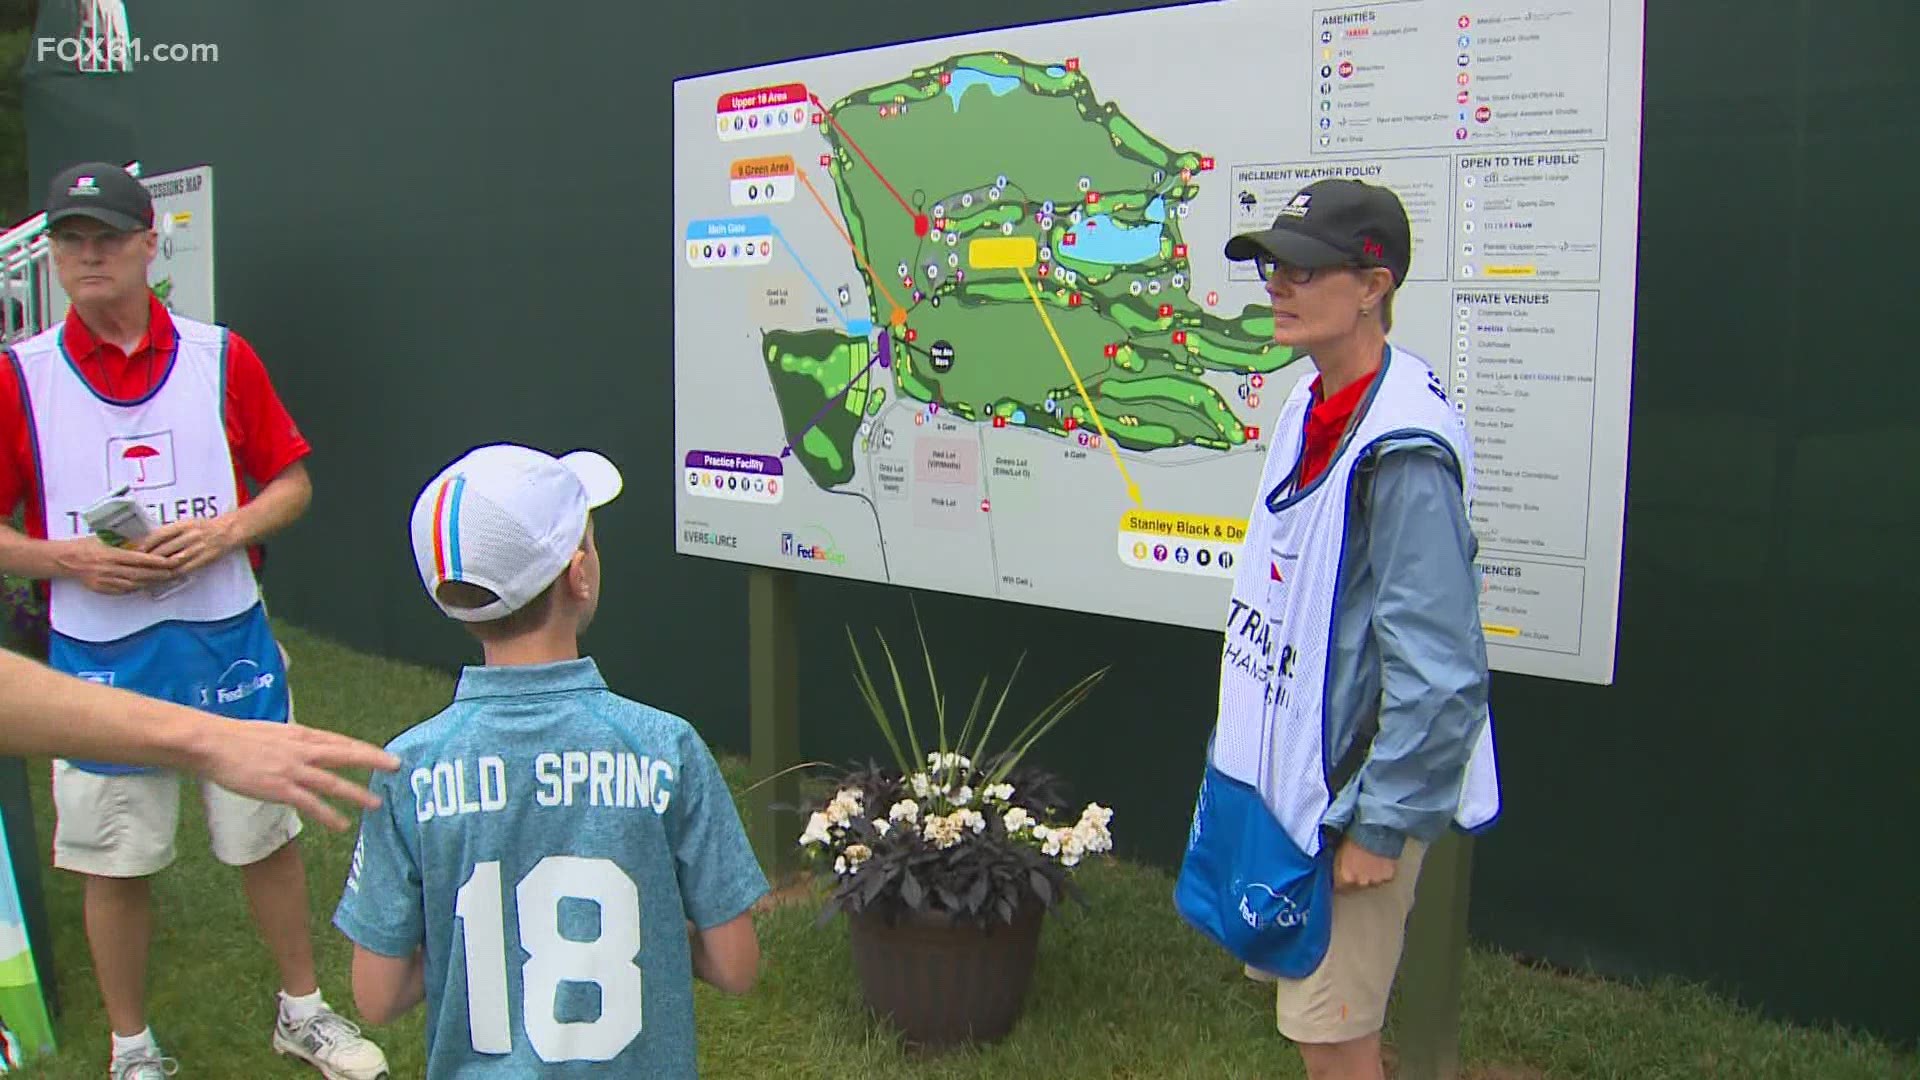 Travelers Championship usually staffs around four thousand volunteers, this year, they will have one thousand volunteers returning to the TPC.